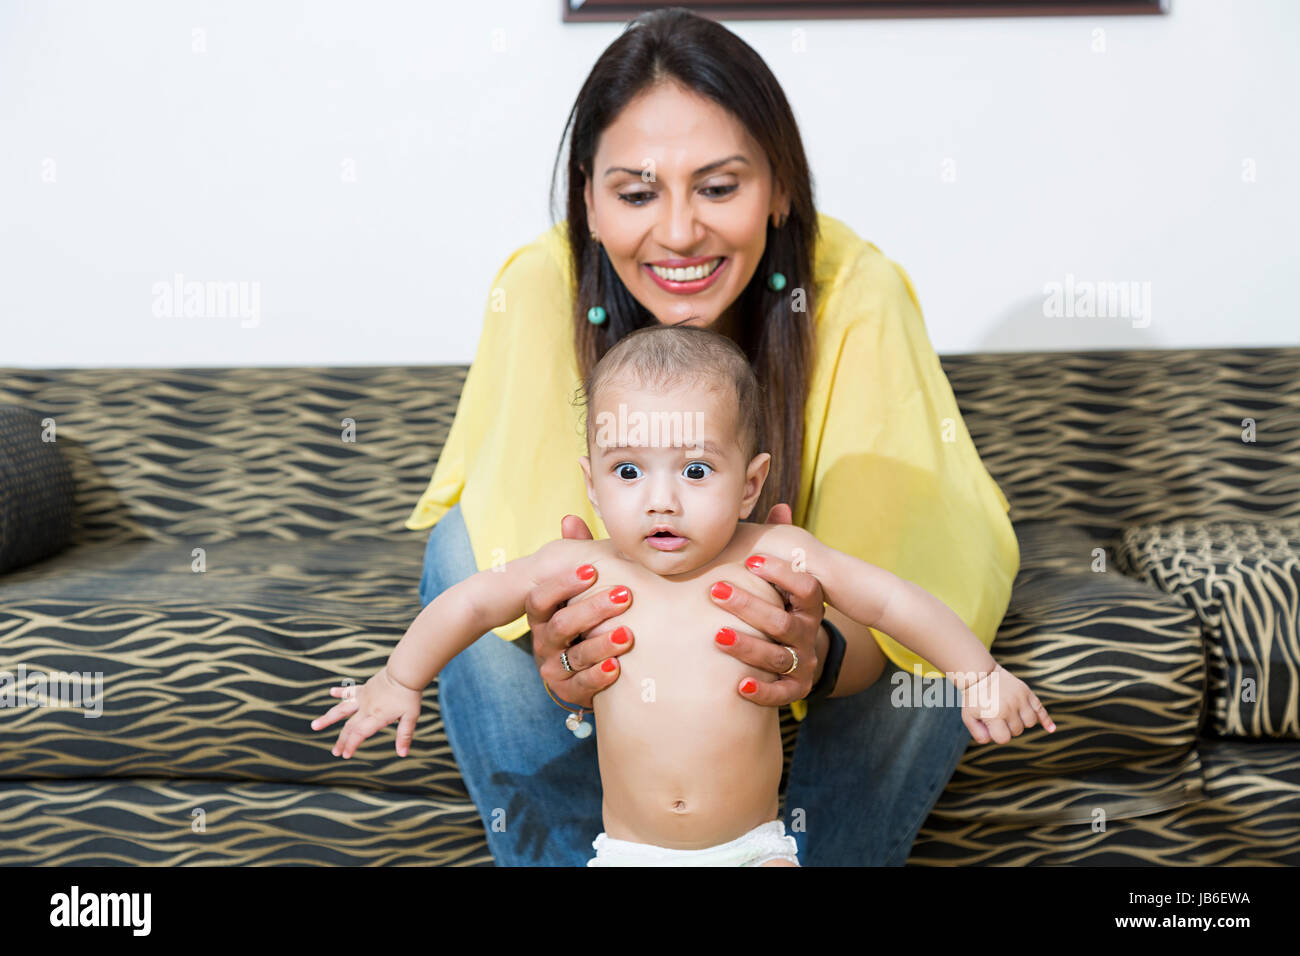 2 People Adult Woman At Home Baby Beginning Boy Helping Holding Smiling Standing Stock Photo